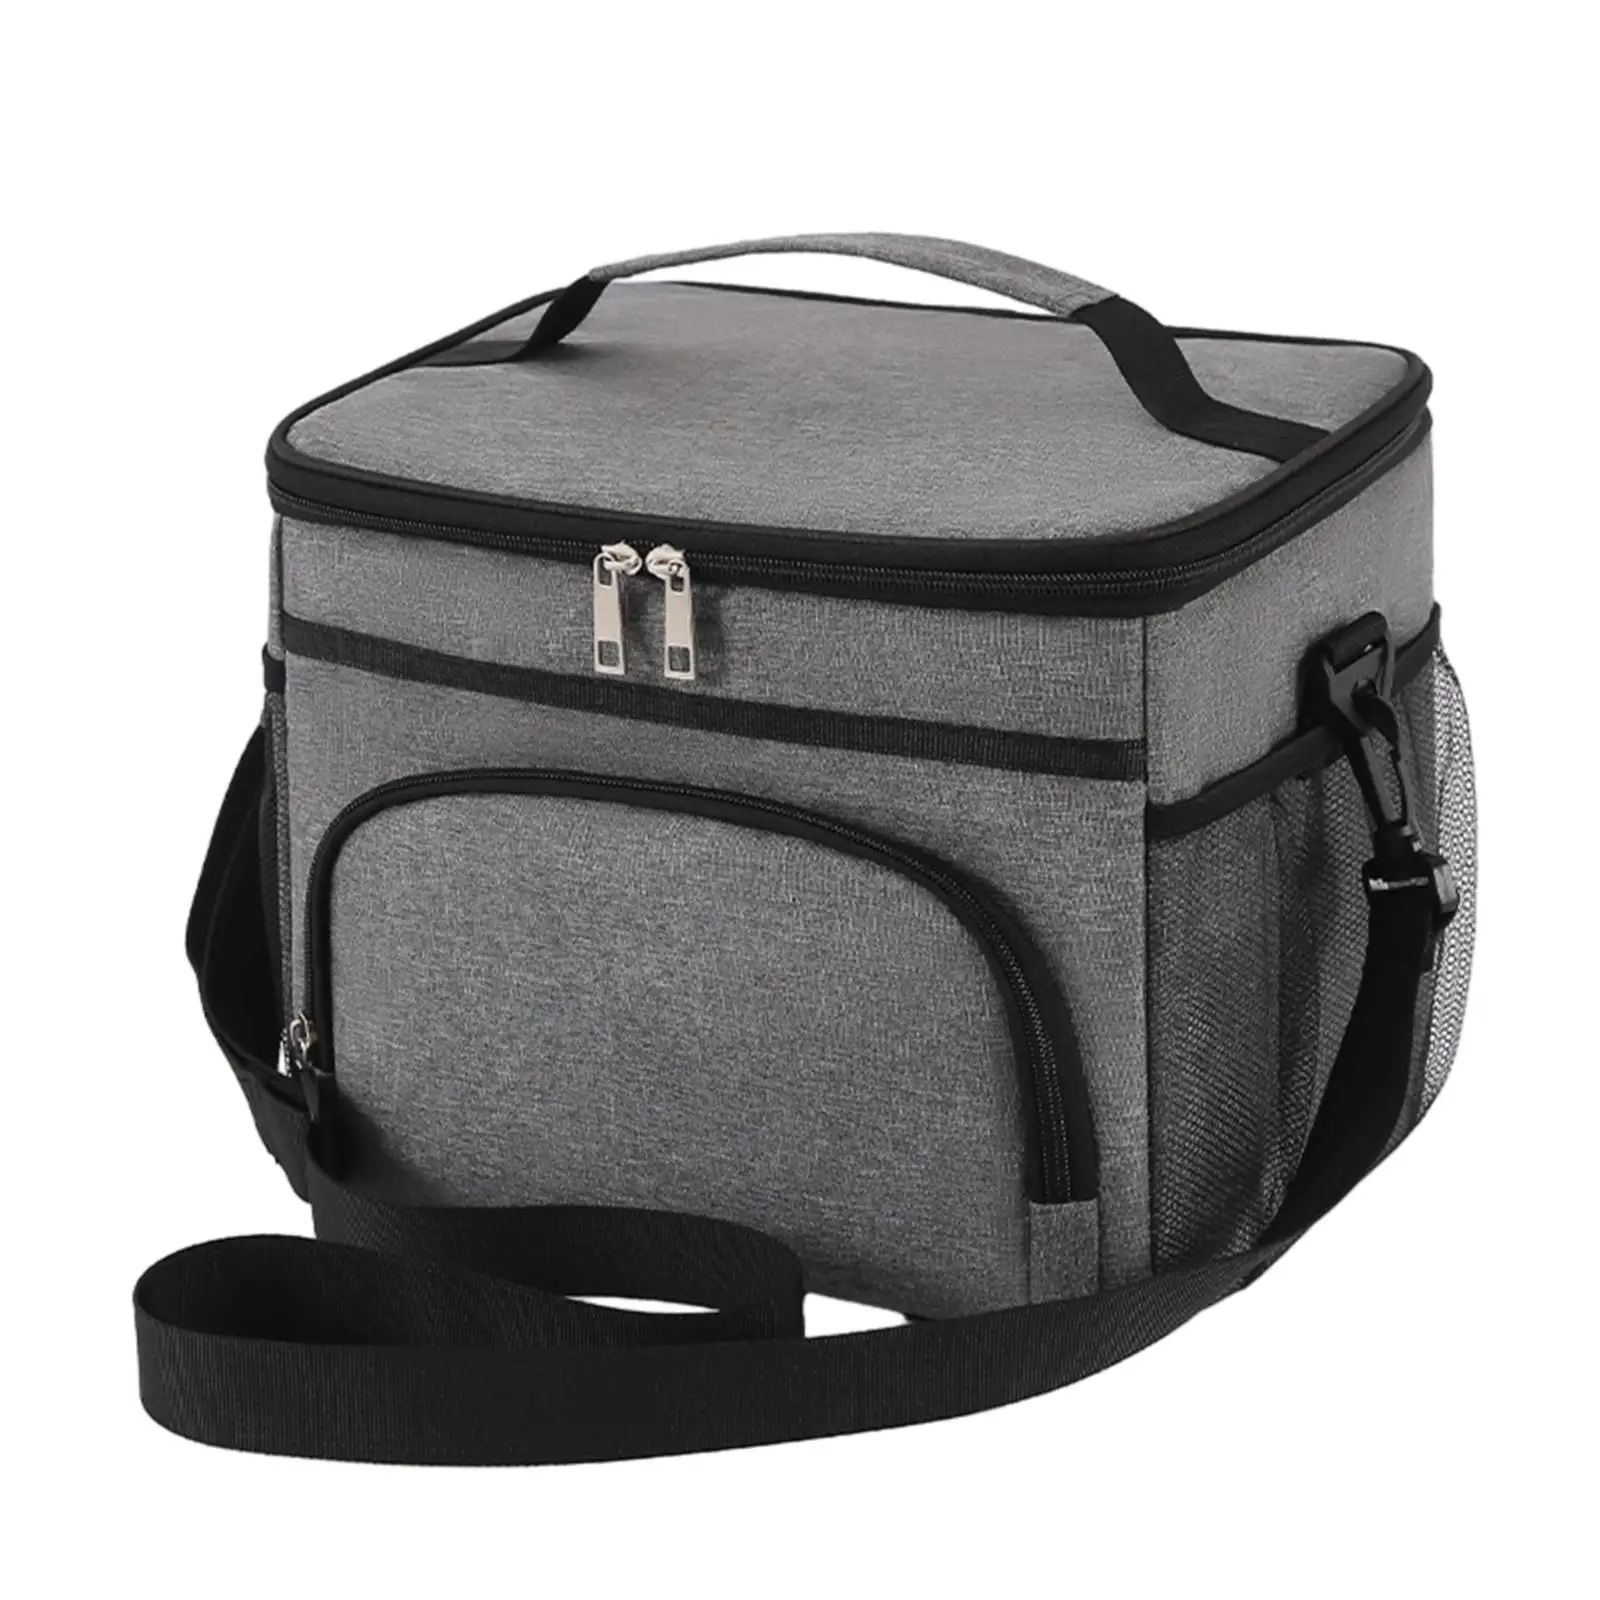 Reusable Lunch Box with Adjustable Strap Tote Handbag Insulated Thermal Bag for Adults Hiking Office Men